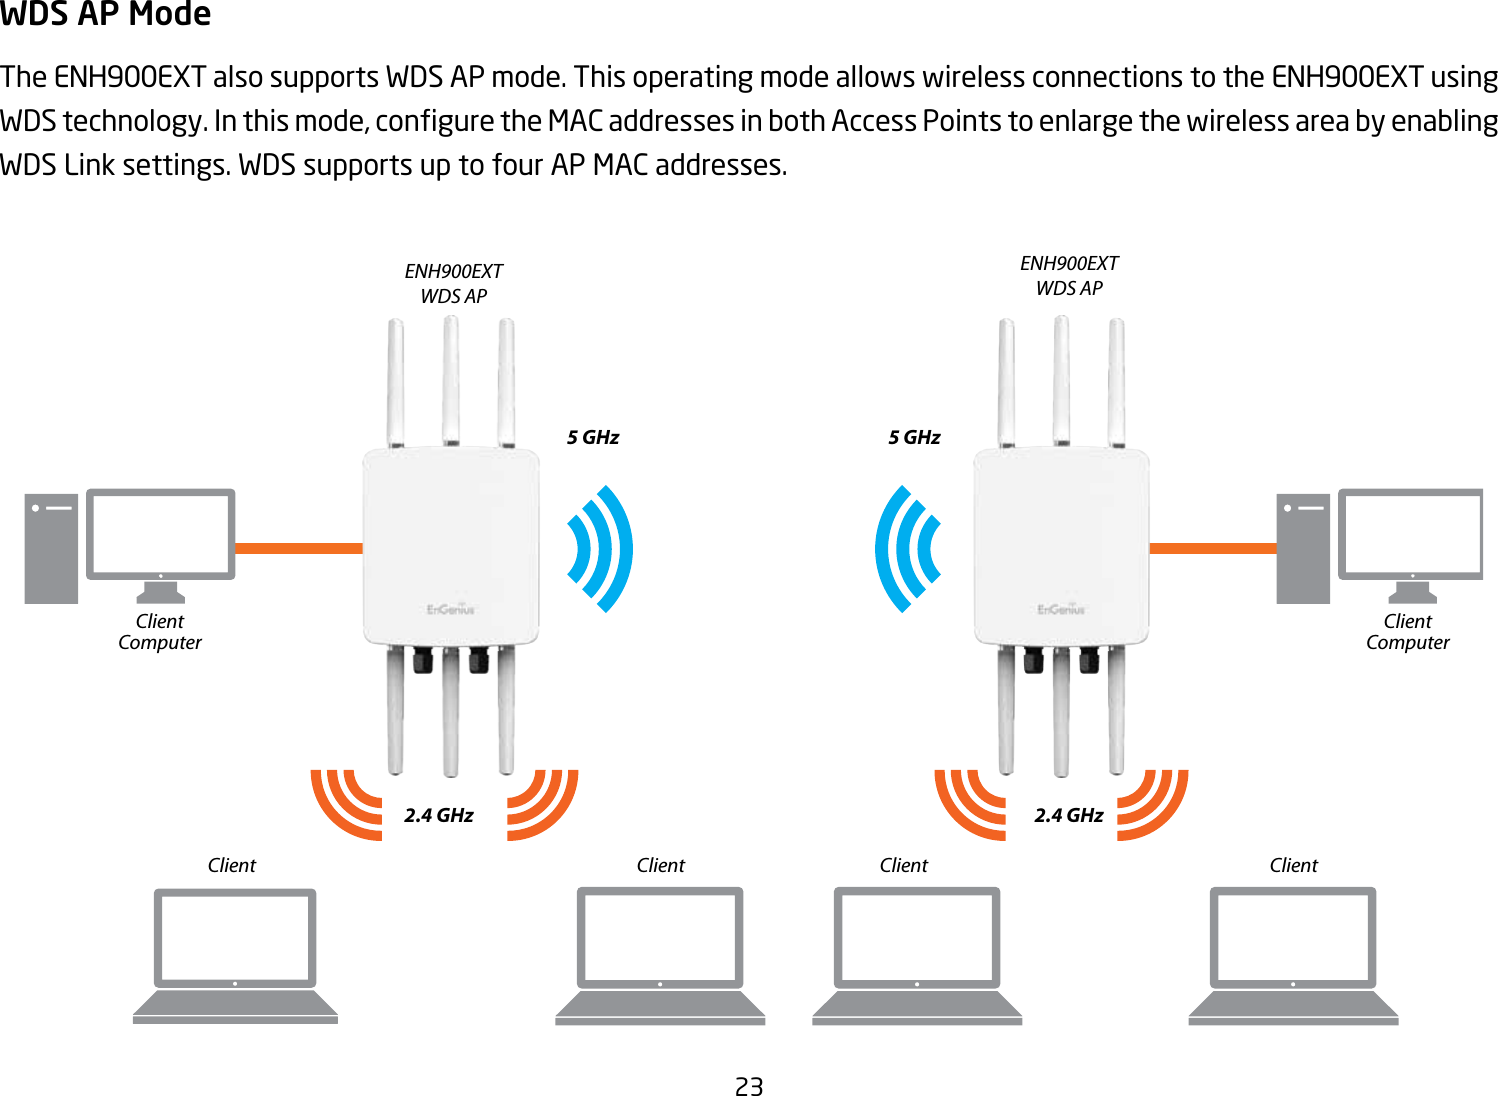 23WDS AP ModeThe ENH900EXT also supports WDS AP mode. This operating mode allows wireless connections to the ENH900EXT using WDStechnology.Inthismode,conguretheMACaddressesinbothAccessPointstoenlargethewirelessareabyenablingWDS Link settings. WDS supports up to four AP MAC addresses.ENH900EXTWDS APENH900EXTWDS AP2.4 GHz 2.4 GHz5 GHz 5 GHzClient Client Client ClientClientComputerClientComputer